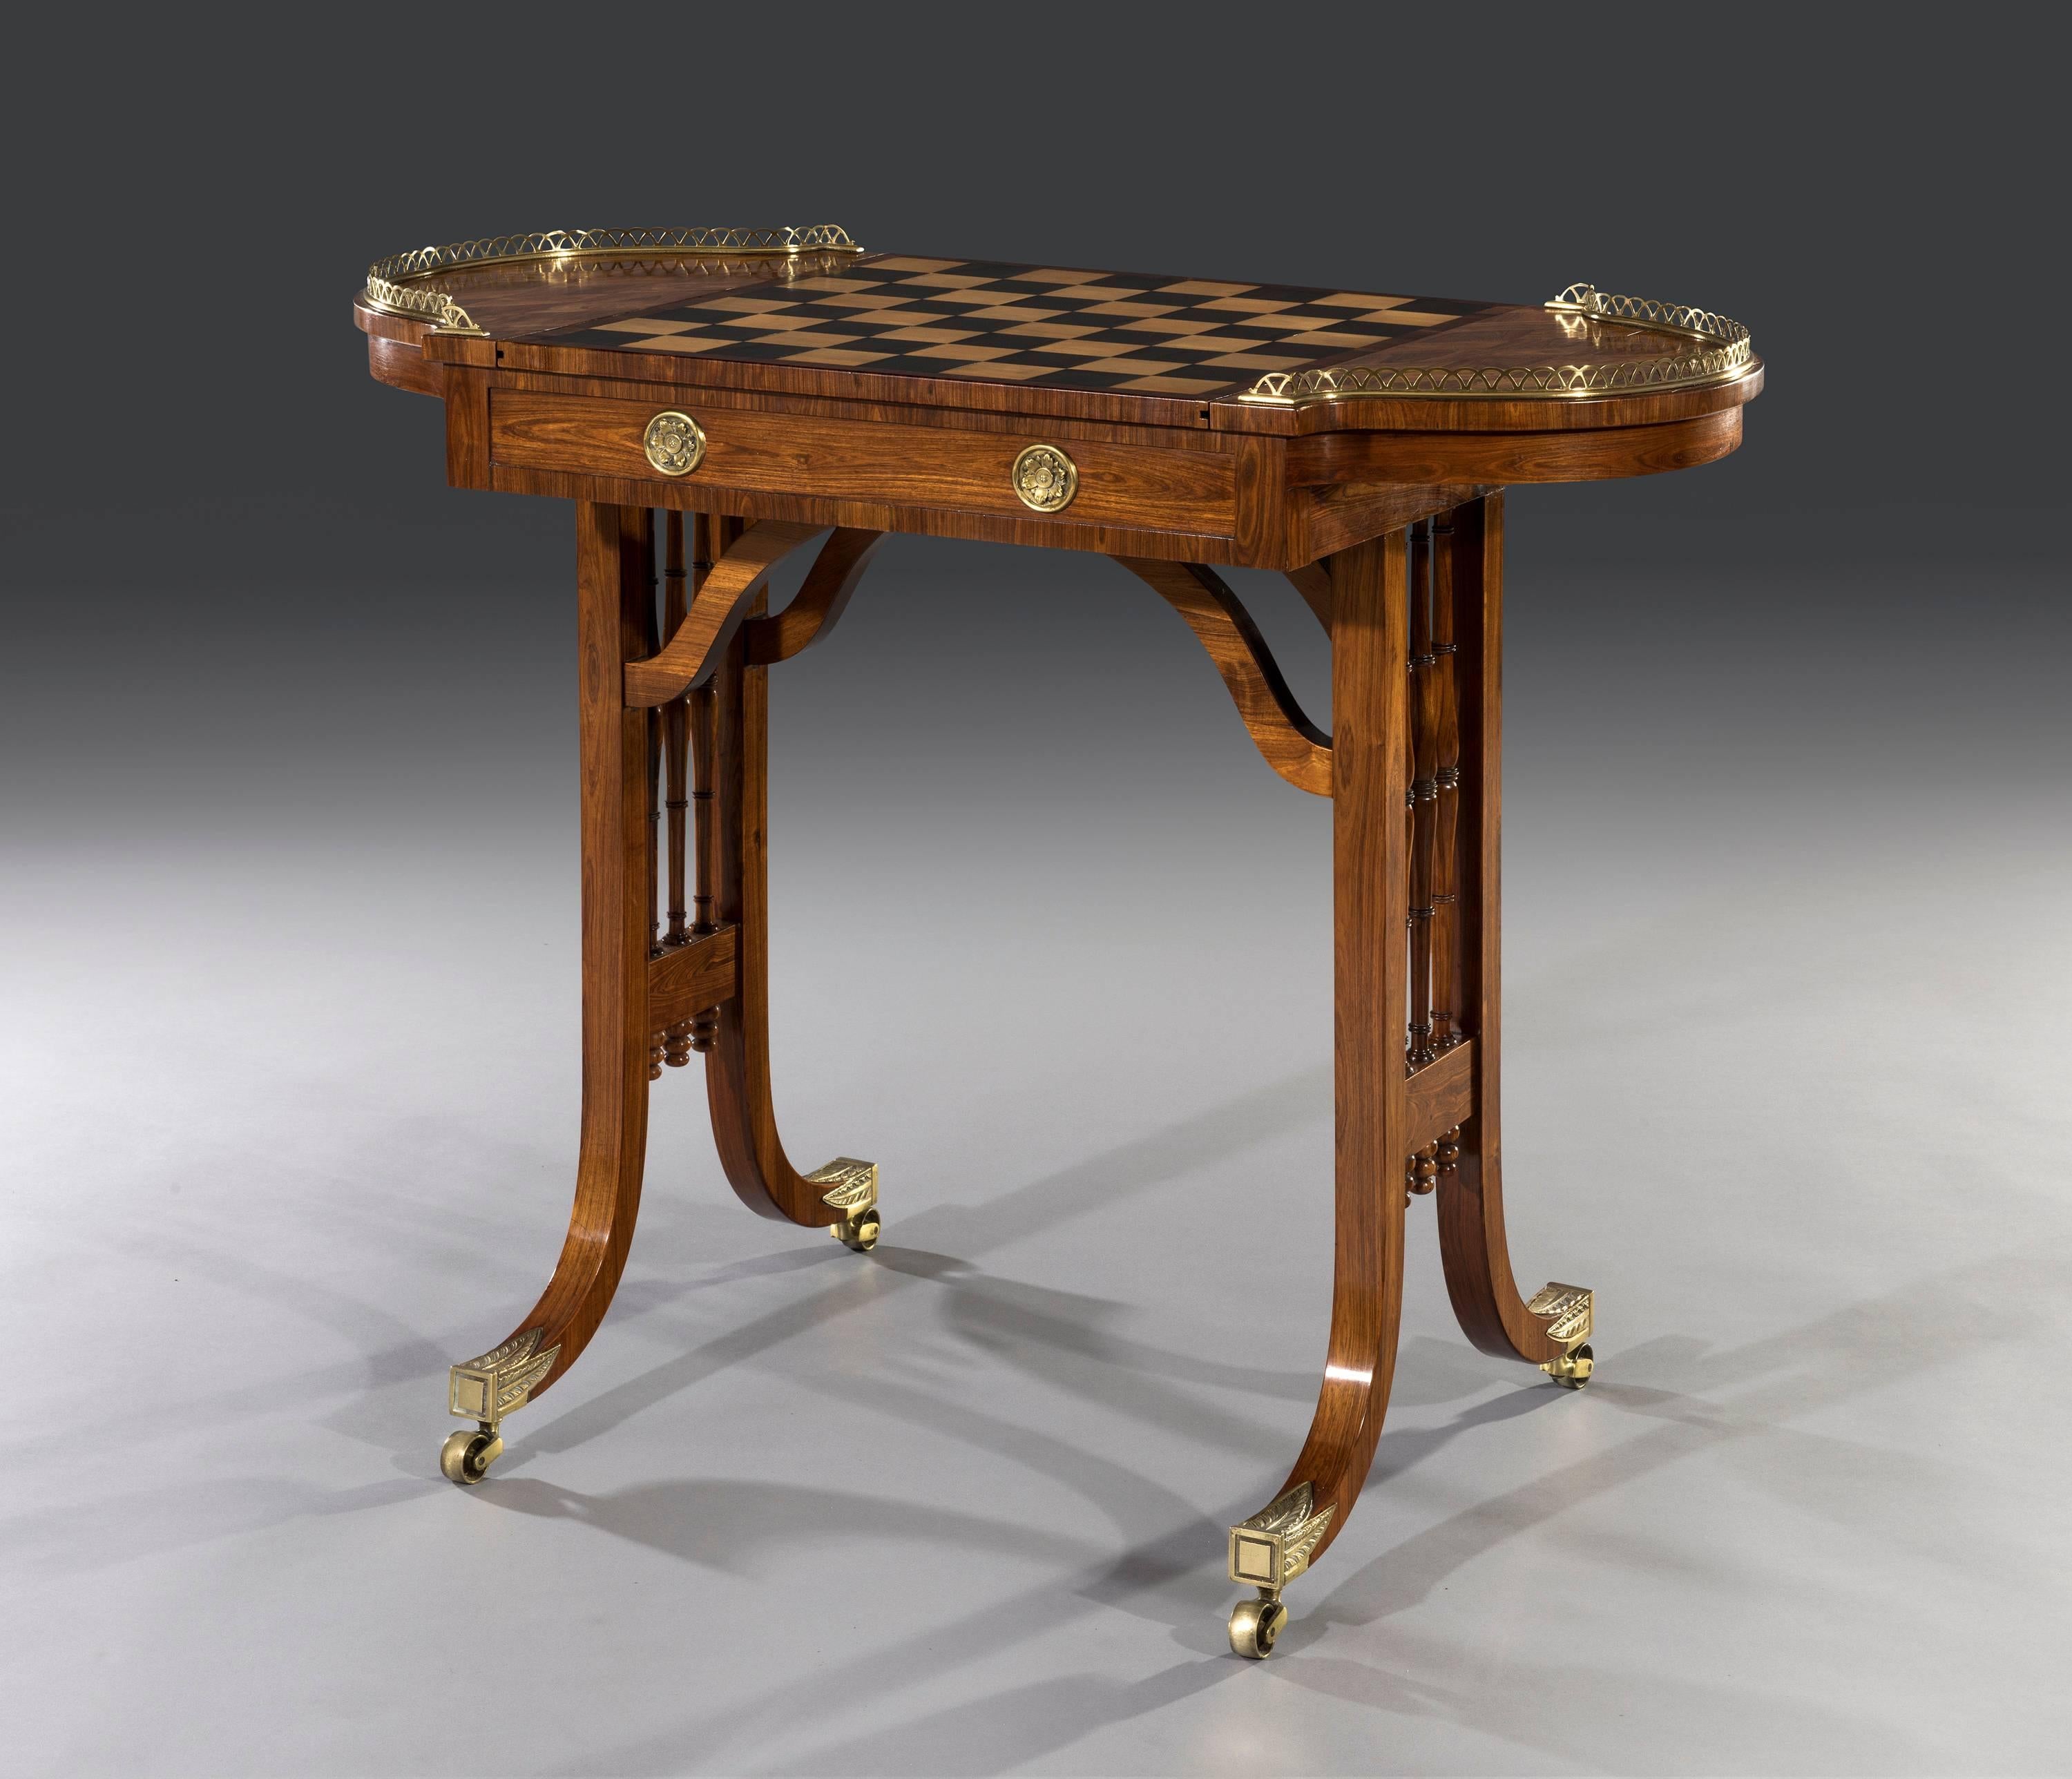 Early 19th century Regency period kingwood parquetry reversible games table.